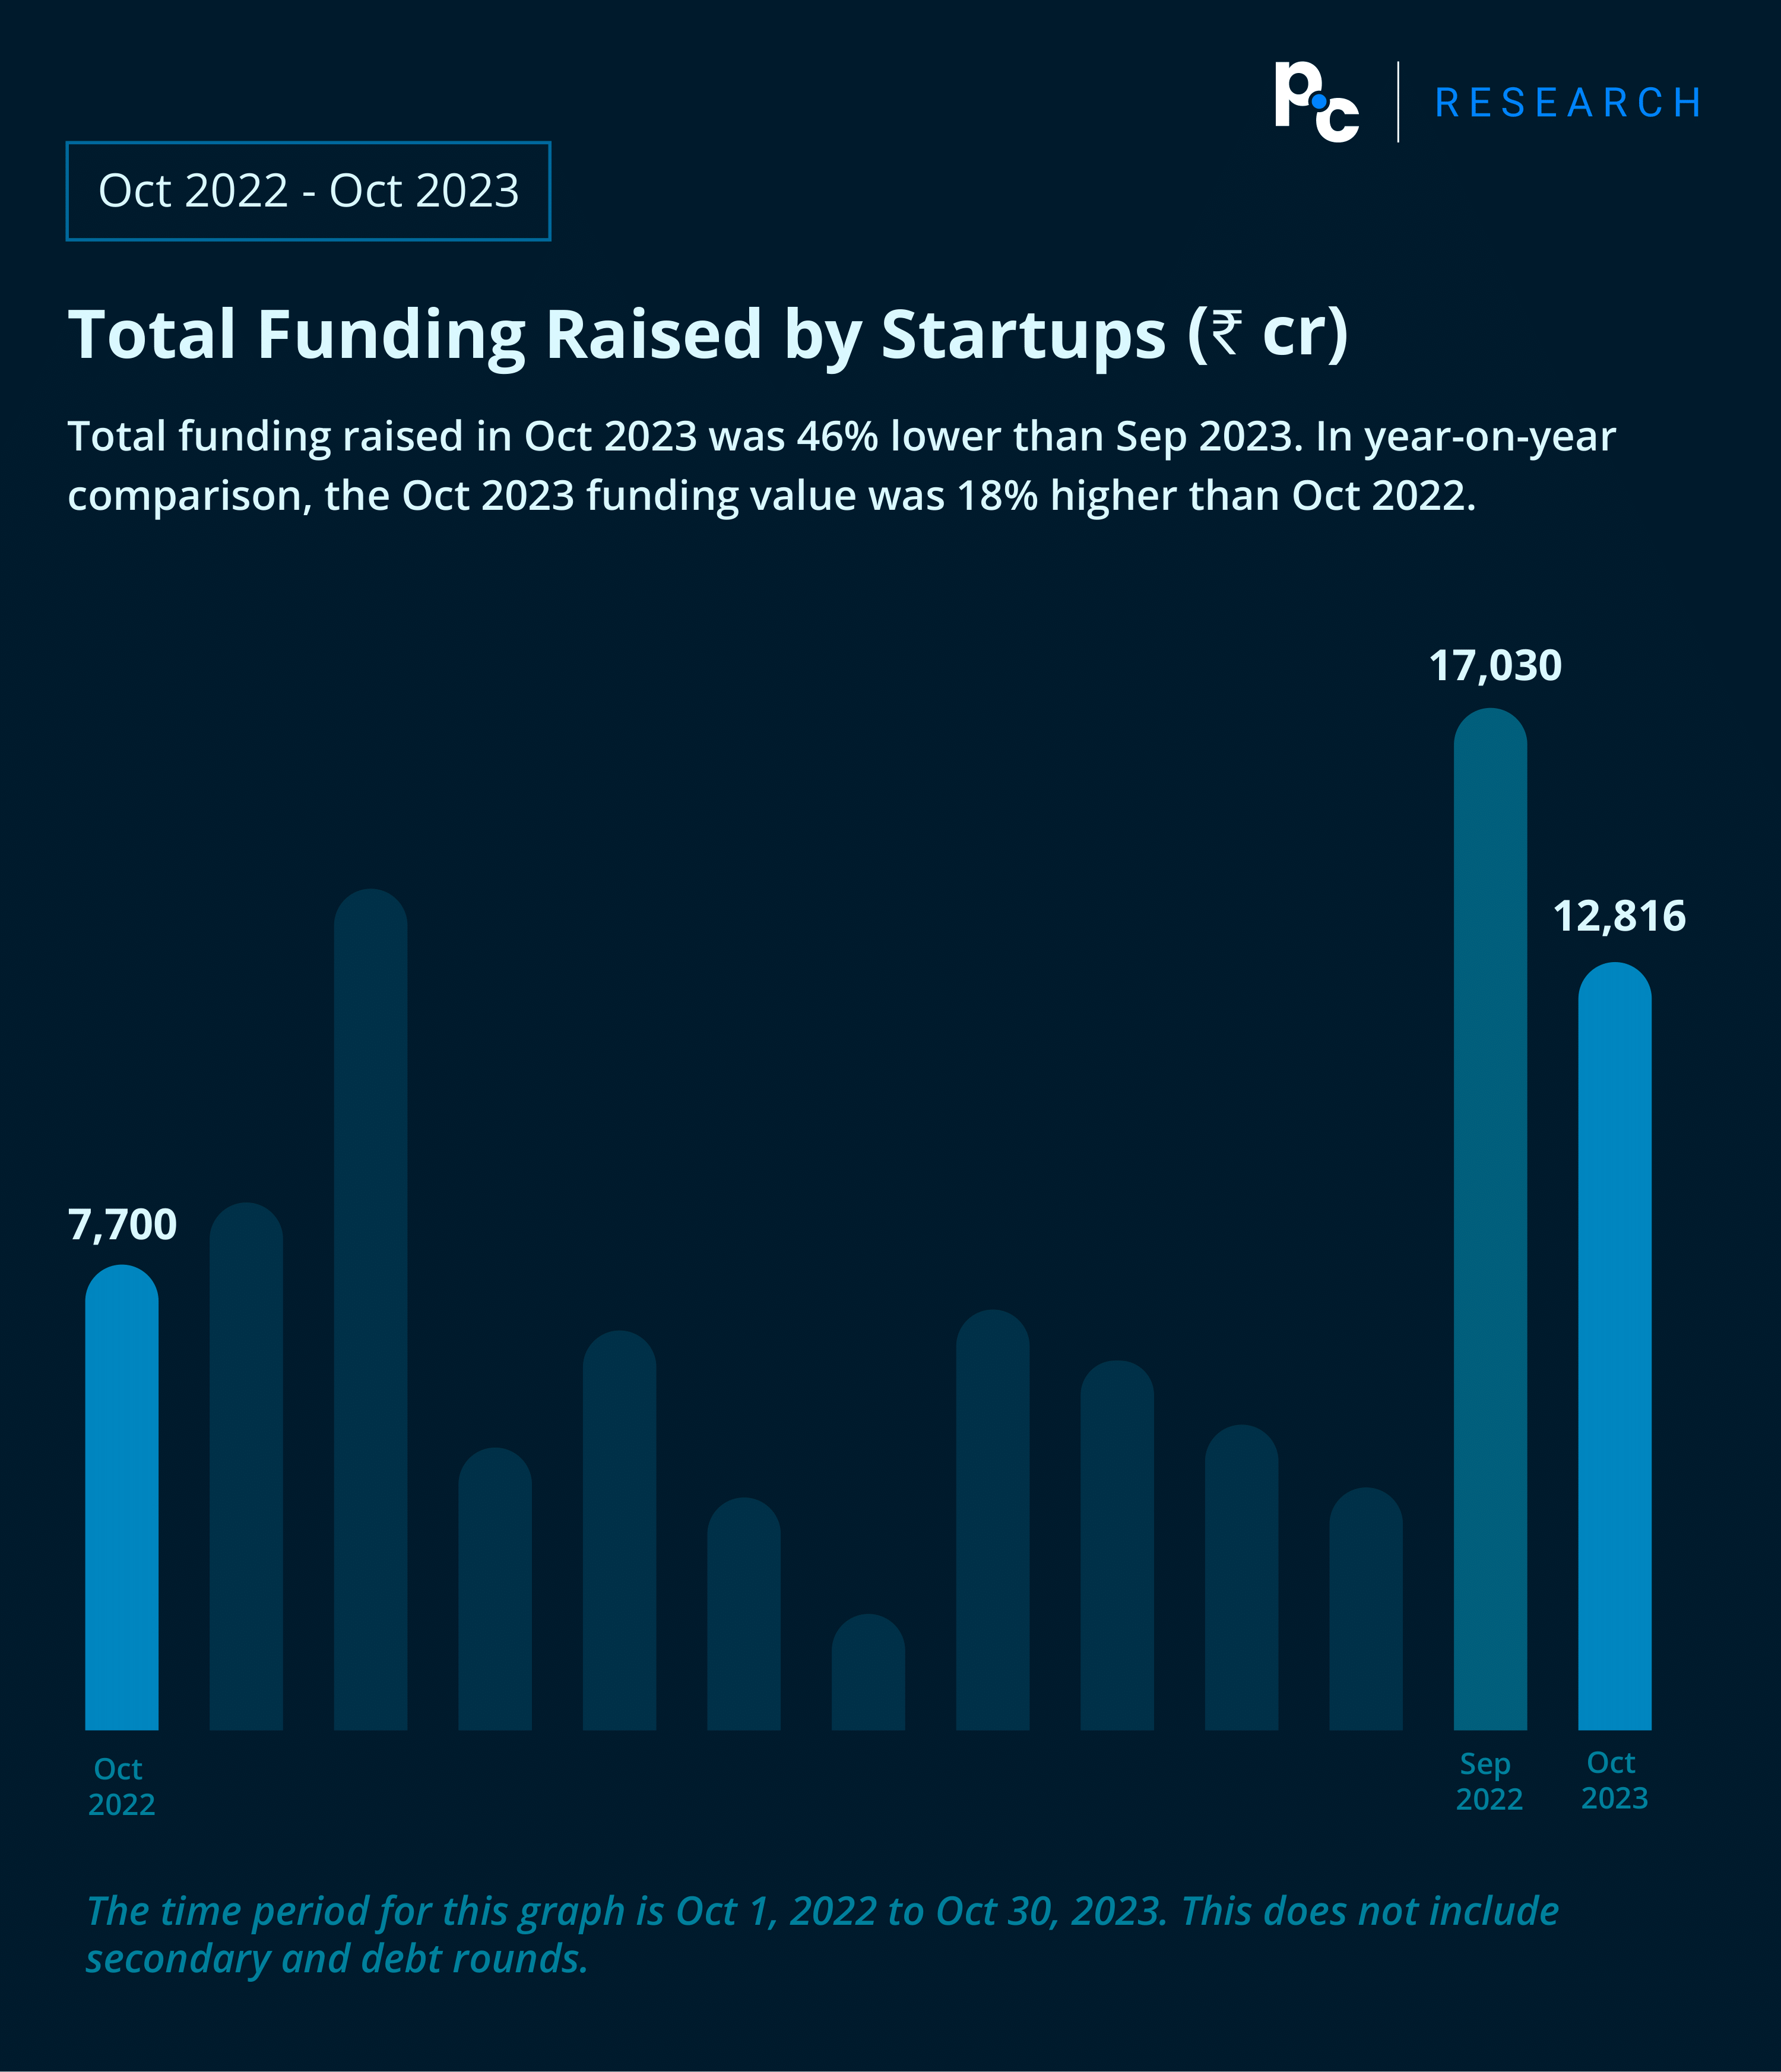 October 2023: Total Funding Raised by Startups (Oct 2022 - Oct 2023) (₹ cr).

Total funding raised in Oct 2023 was 46% lower than Sep 2023. In year-on-year comparison, the Oct 2023 funding value was 18% higher than Oct 2022.
The time period for this graph is Oct 1, 2022 to Oct 30, 2023. This does not include secondary and debt rounds.